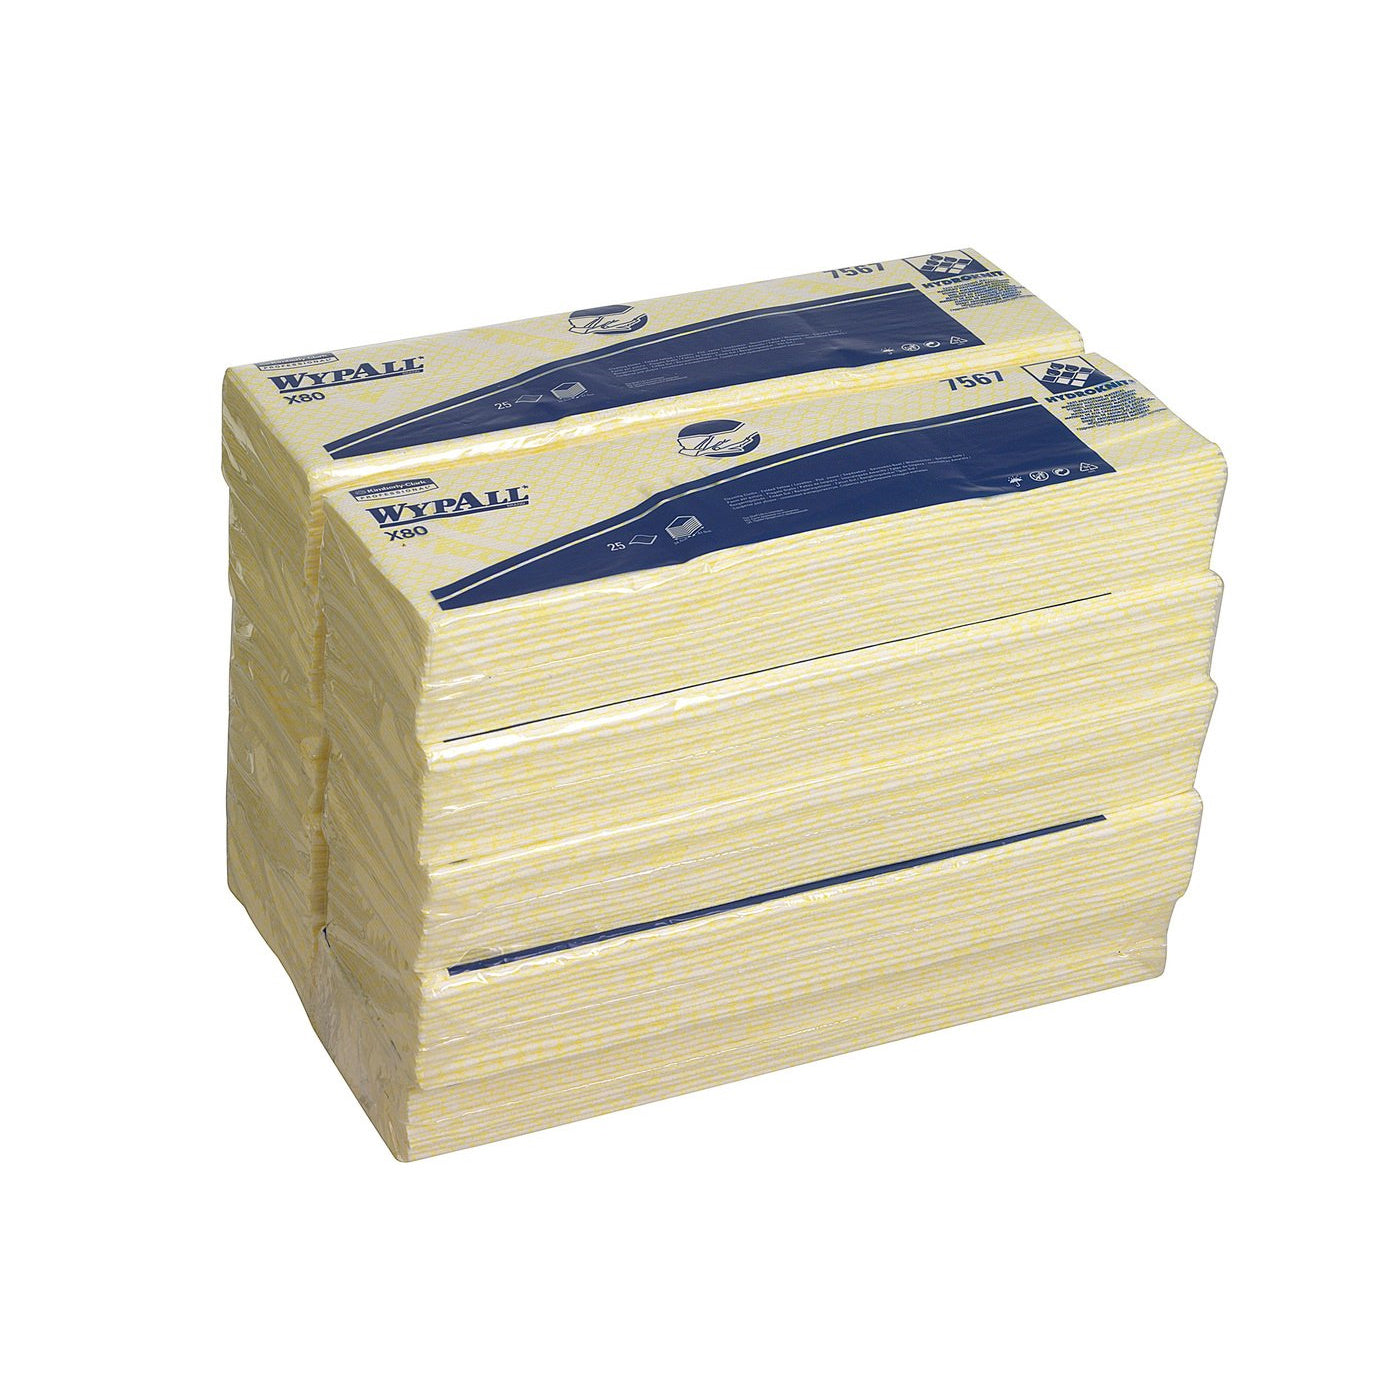 WypAll X80 Cleaning Cloths - Interfolded / Yellow (10 Packs of 25) - Code 7567